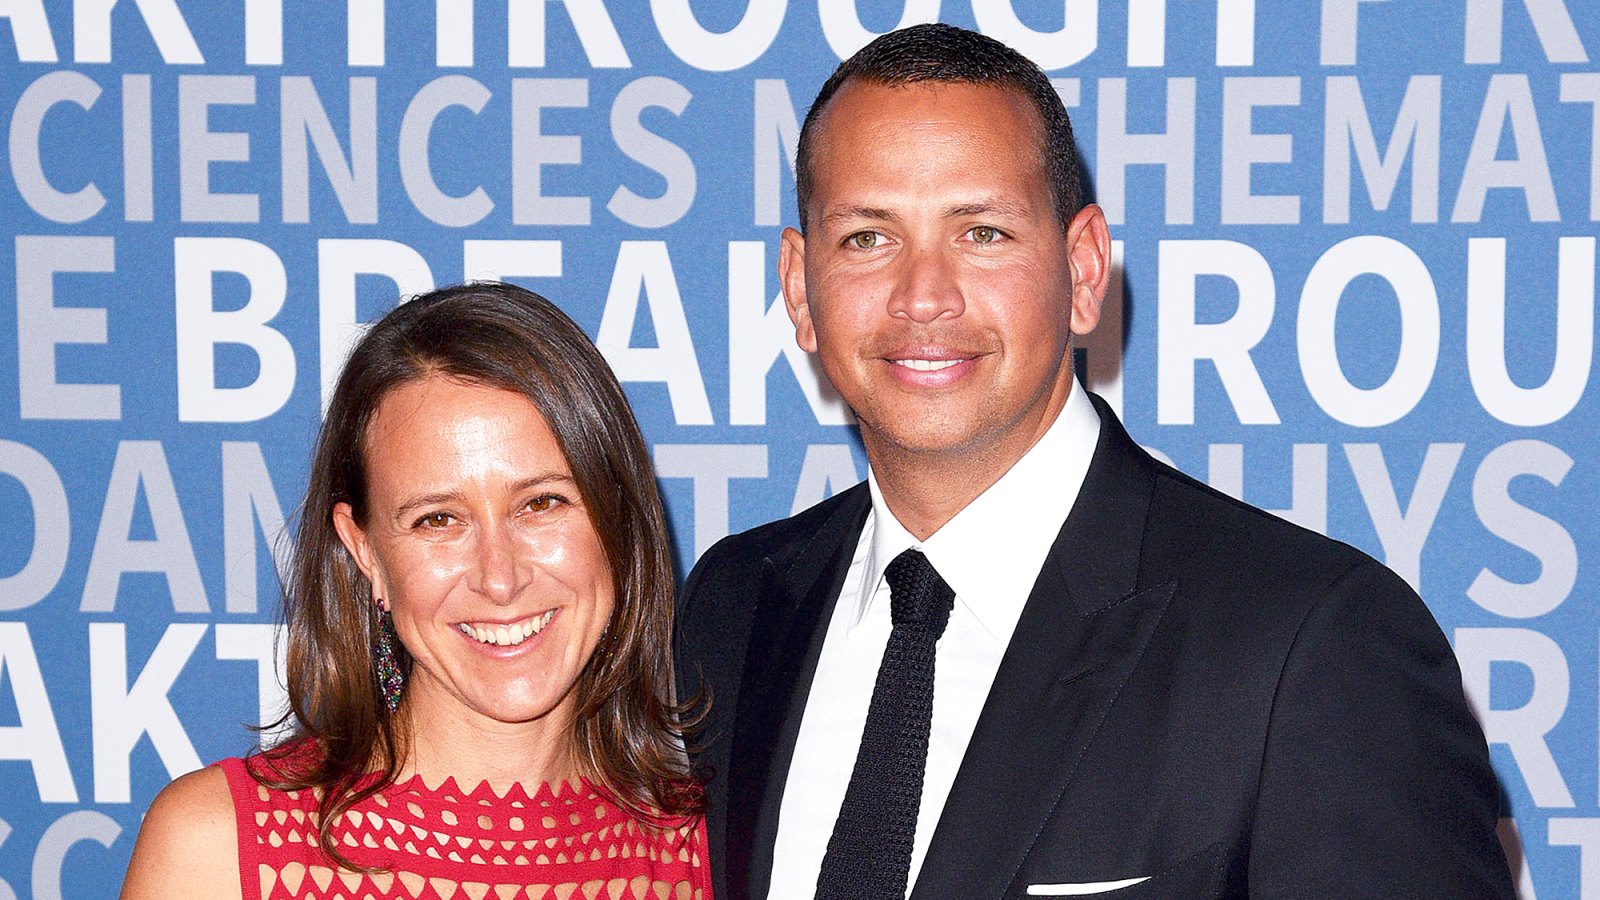 Anne Wojcicki and Alex Rodriguez attend Breakthrough Prize at NASA Ames Research Center in Mountain View, California.